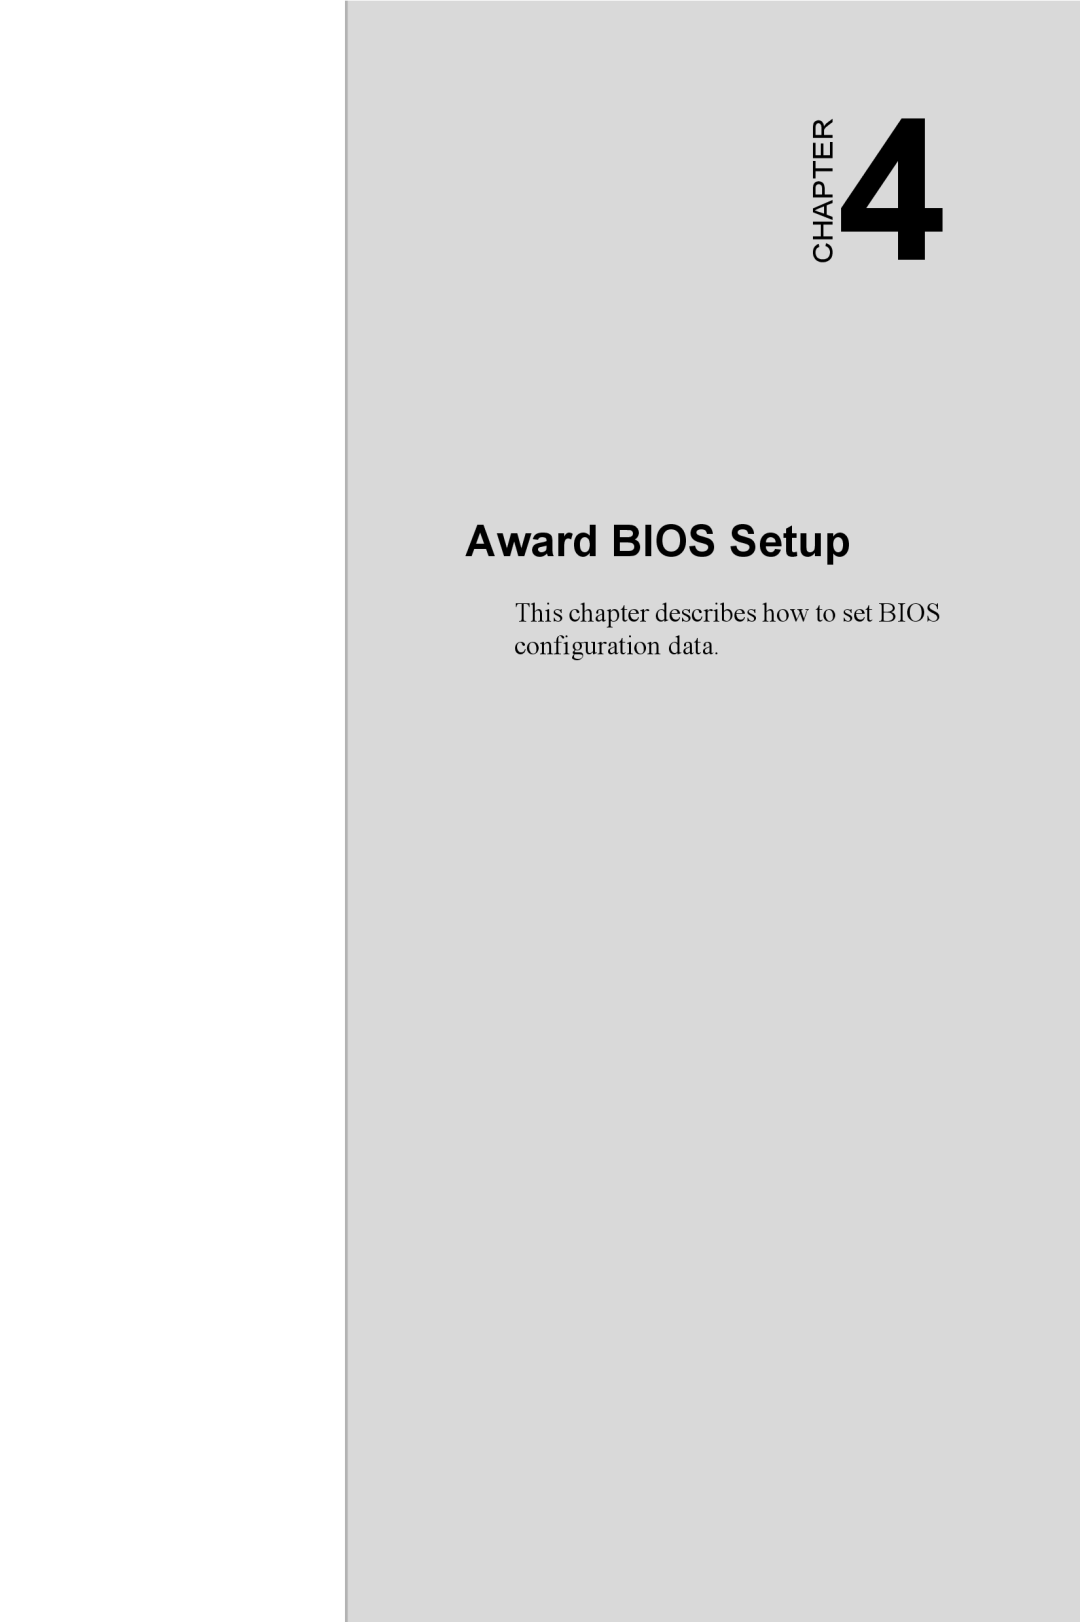 Intel PCM-3370 user manual Award BIOS Setup, Chapter, This chapter describes how to set BIOS configuration data 